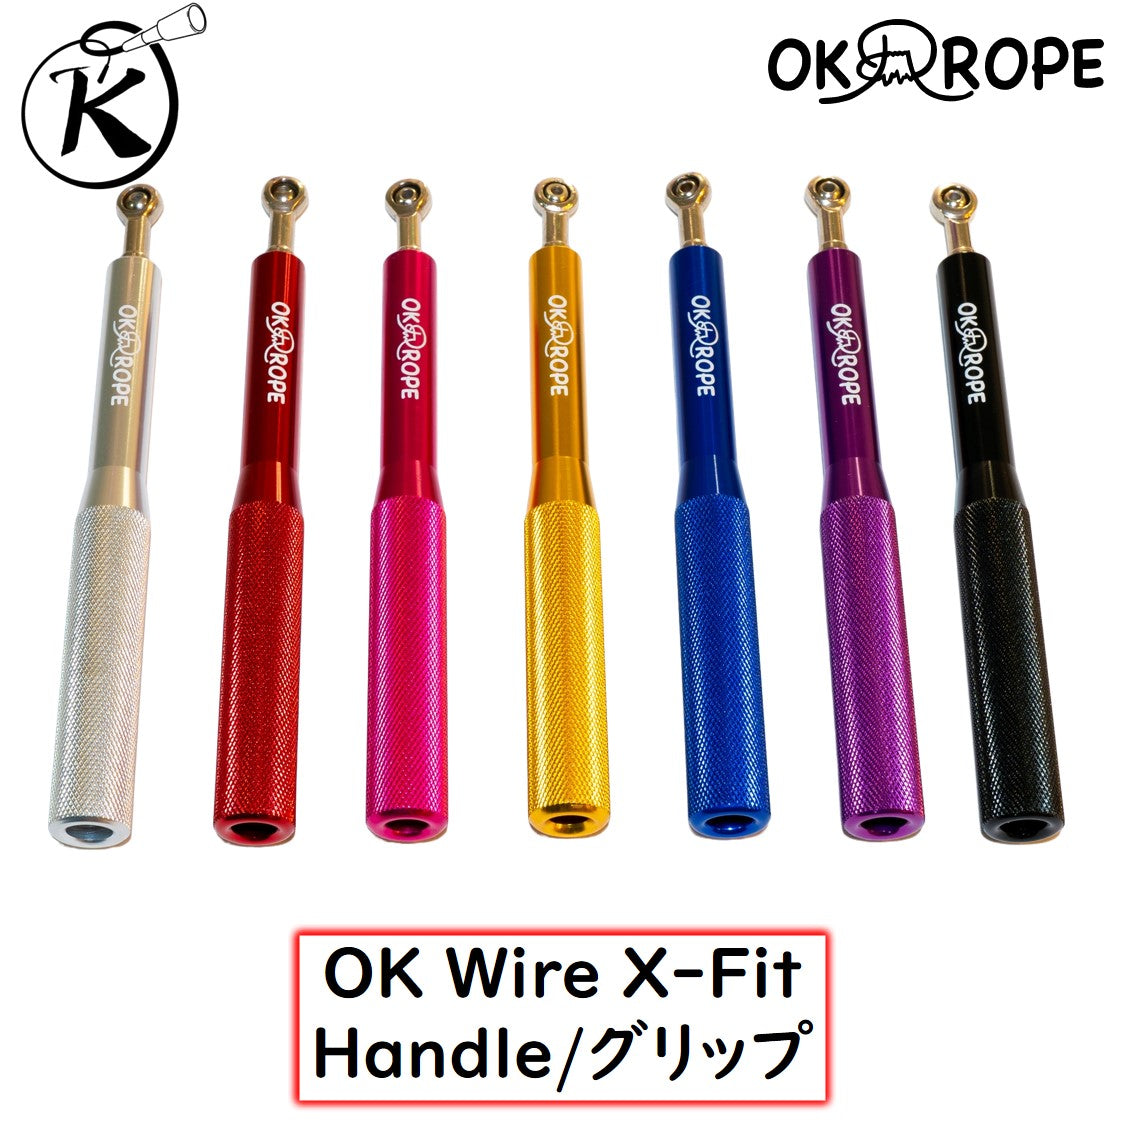 OK Wire X-Fit -Speed Wire Rope- Handle Only (Single Handle)